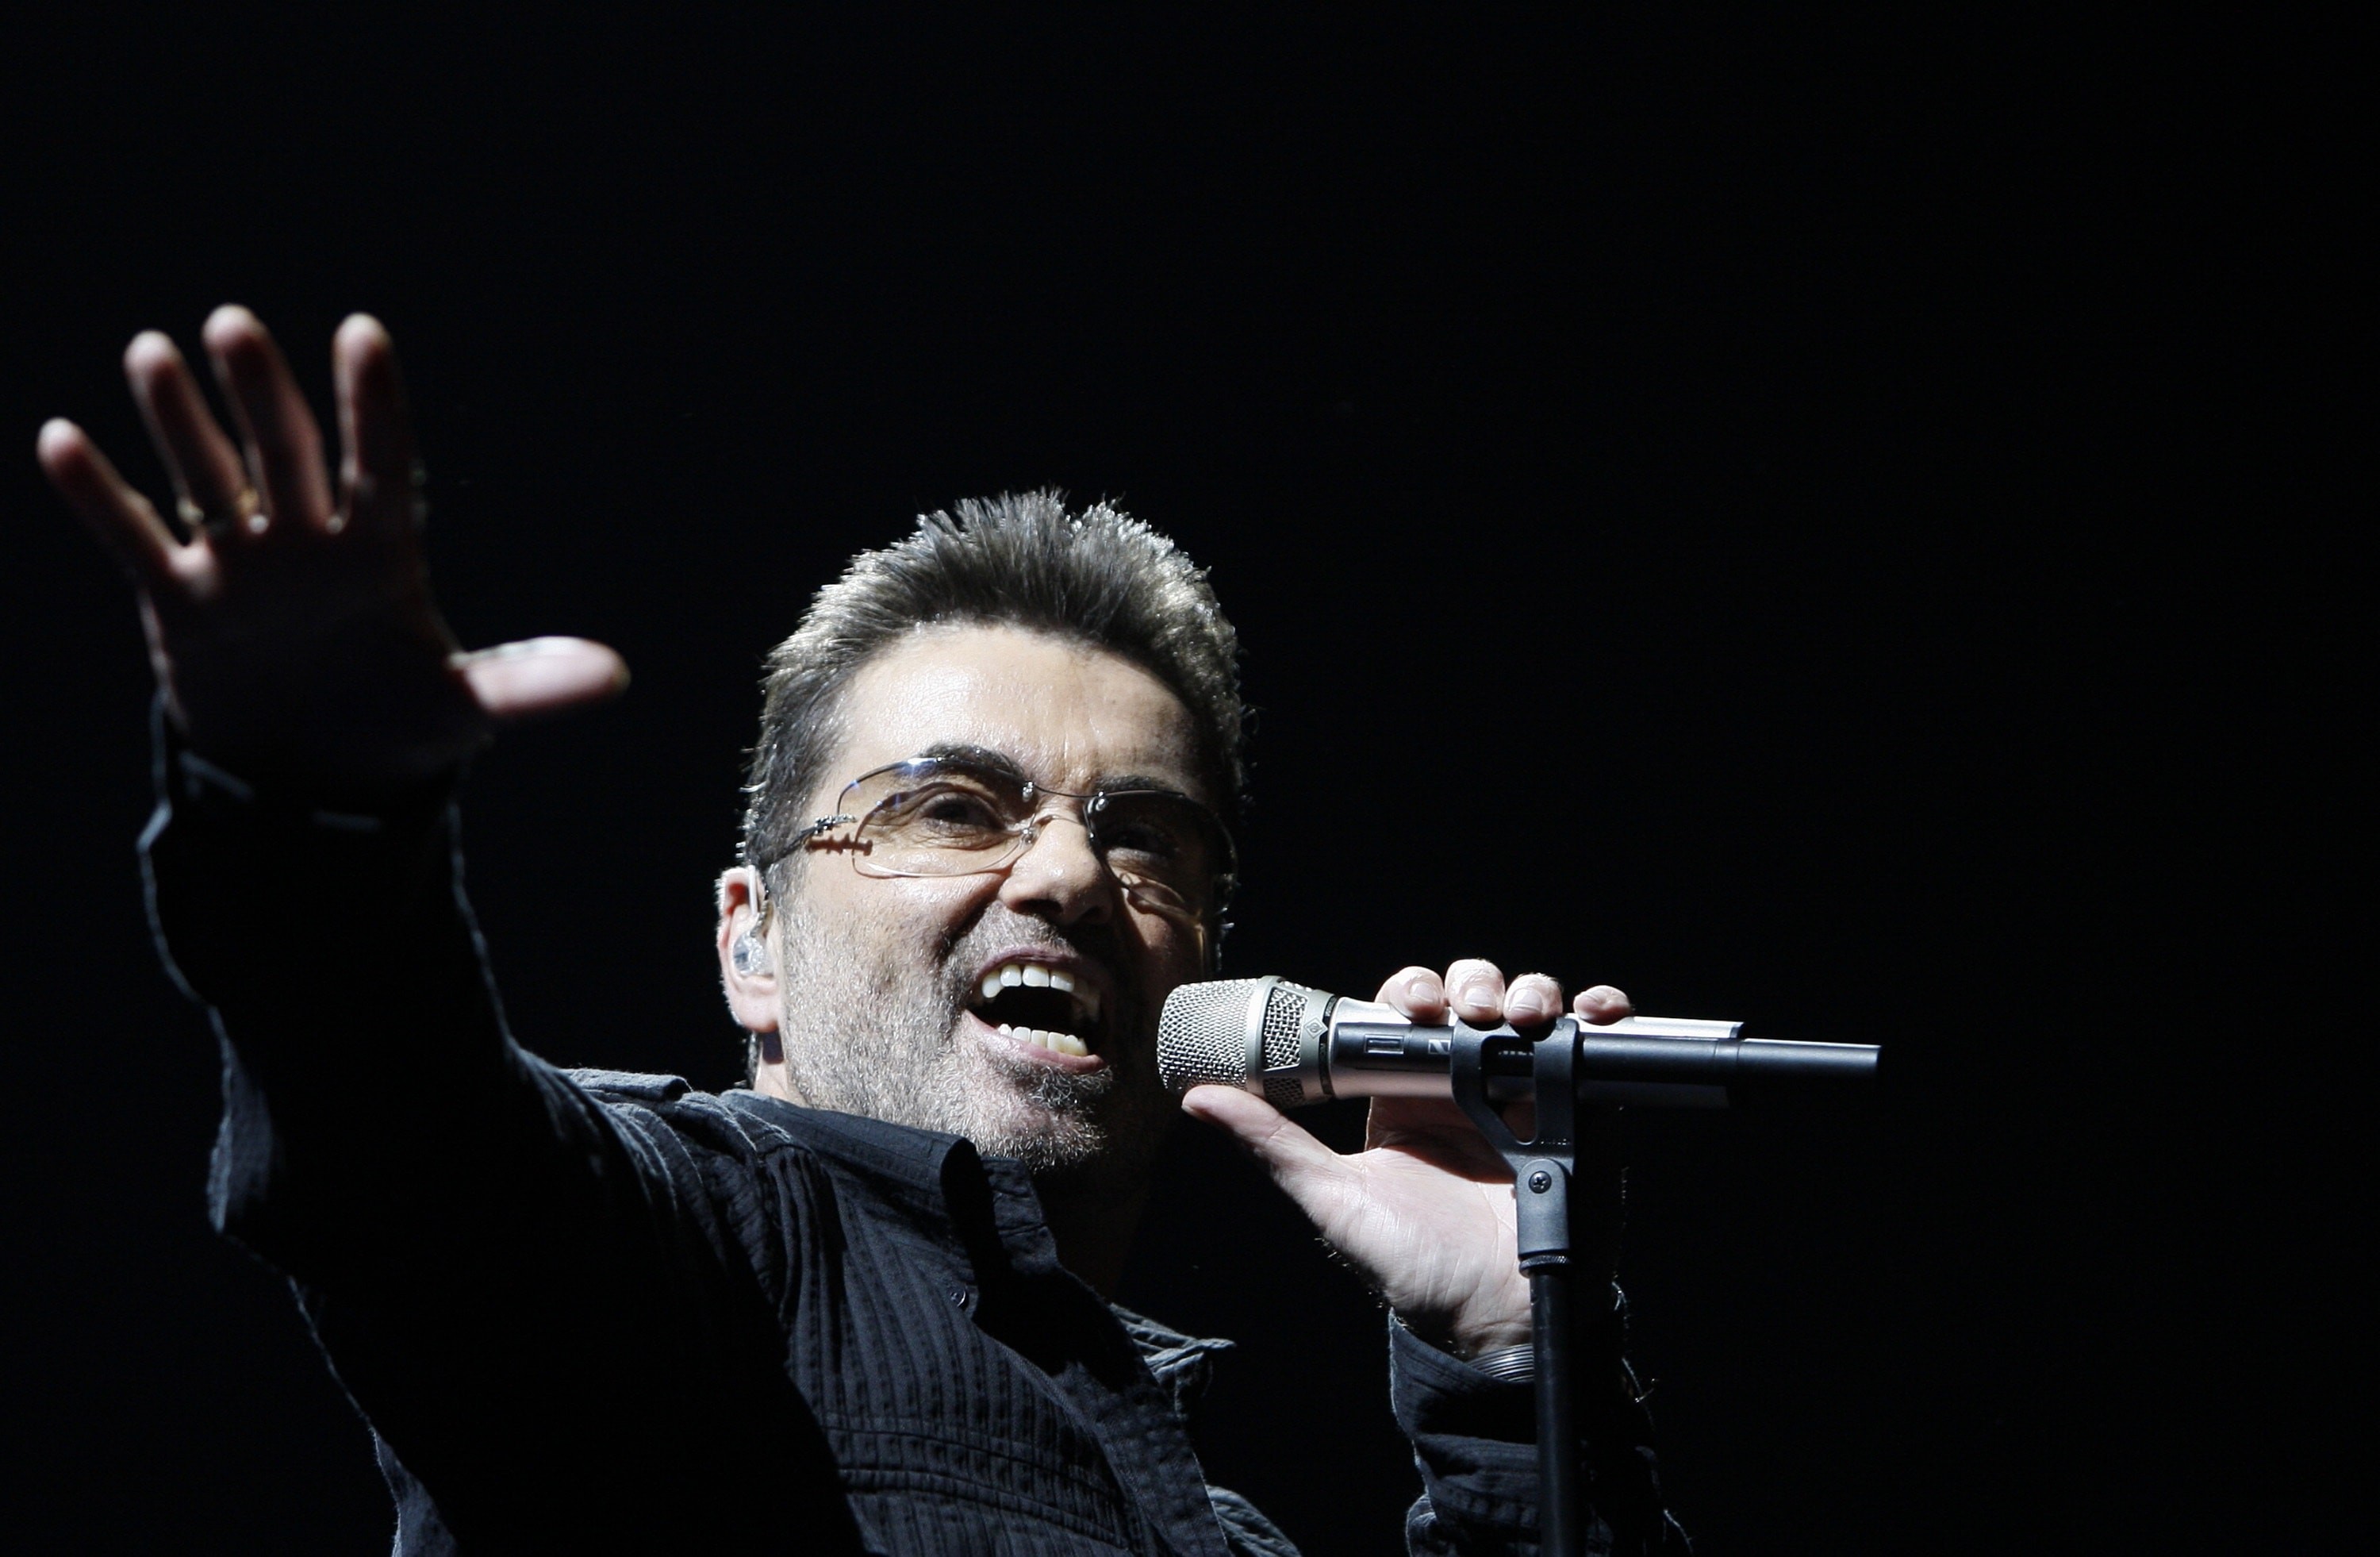 3000x1962 george michael wide wallpapers george michael glamour george michael .